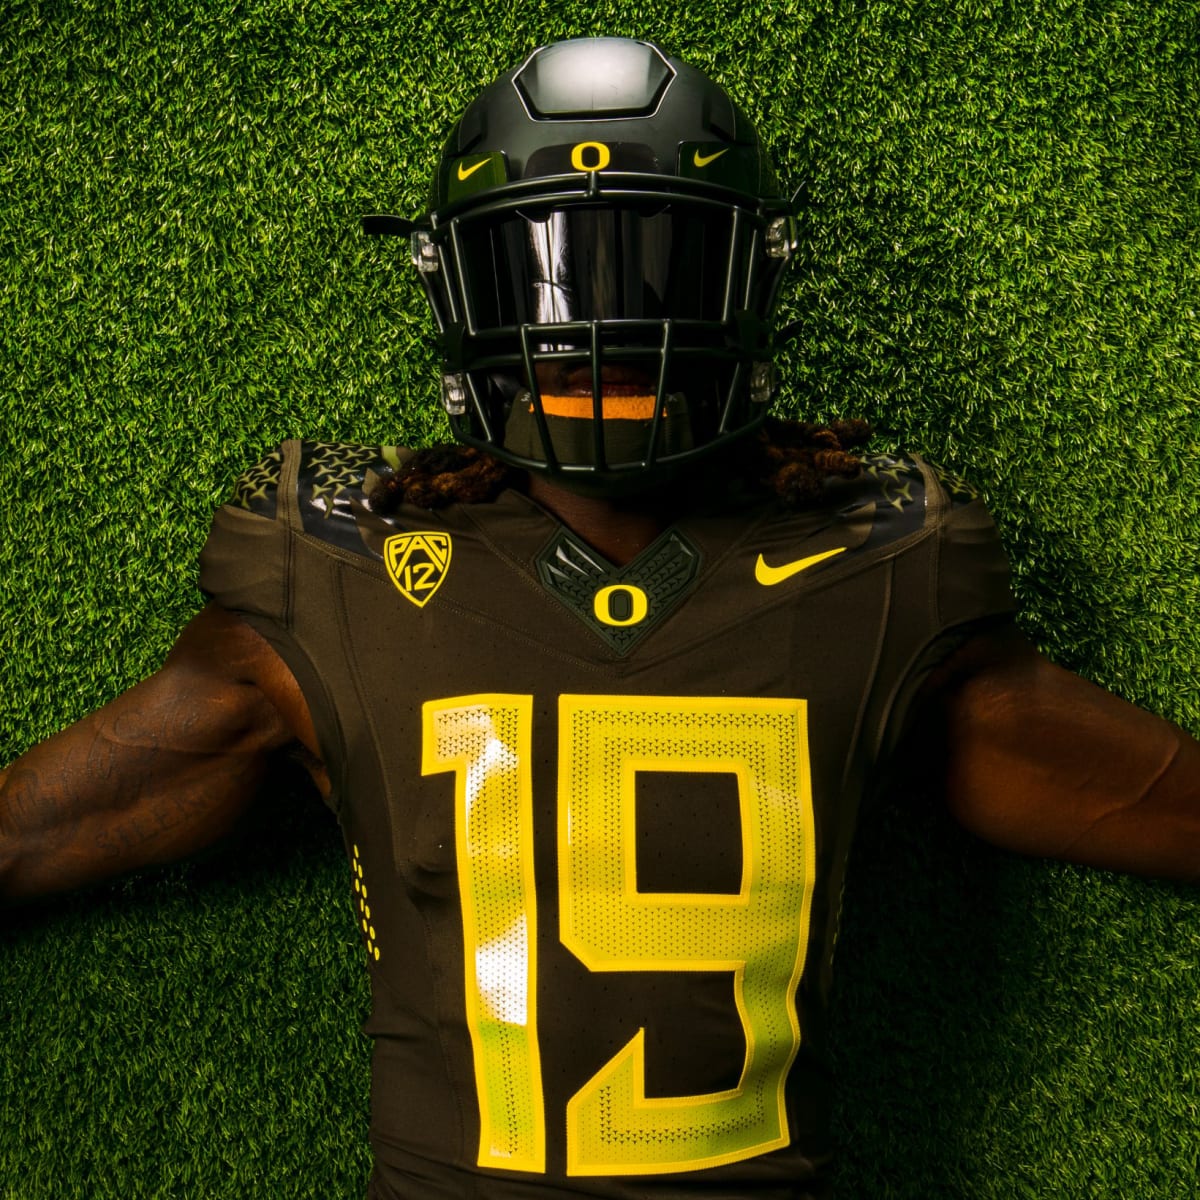 Oregon Football: No surprise, new 2021 jerseys are absolute fire